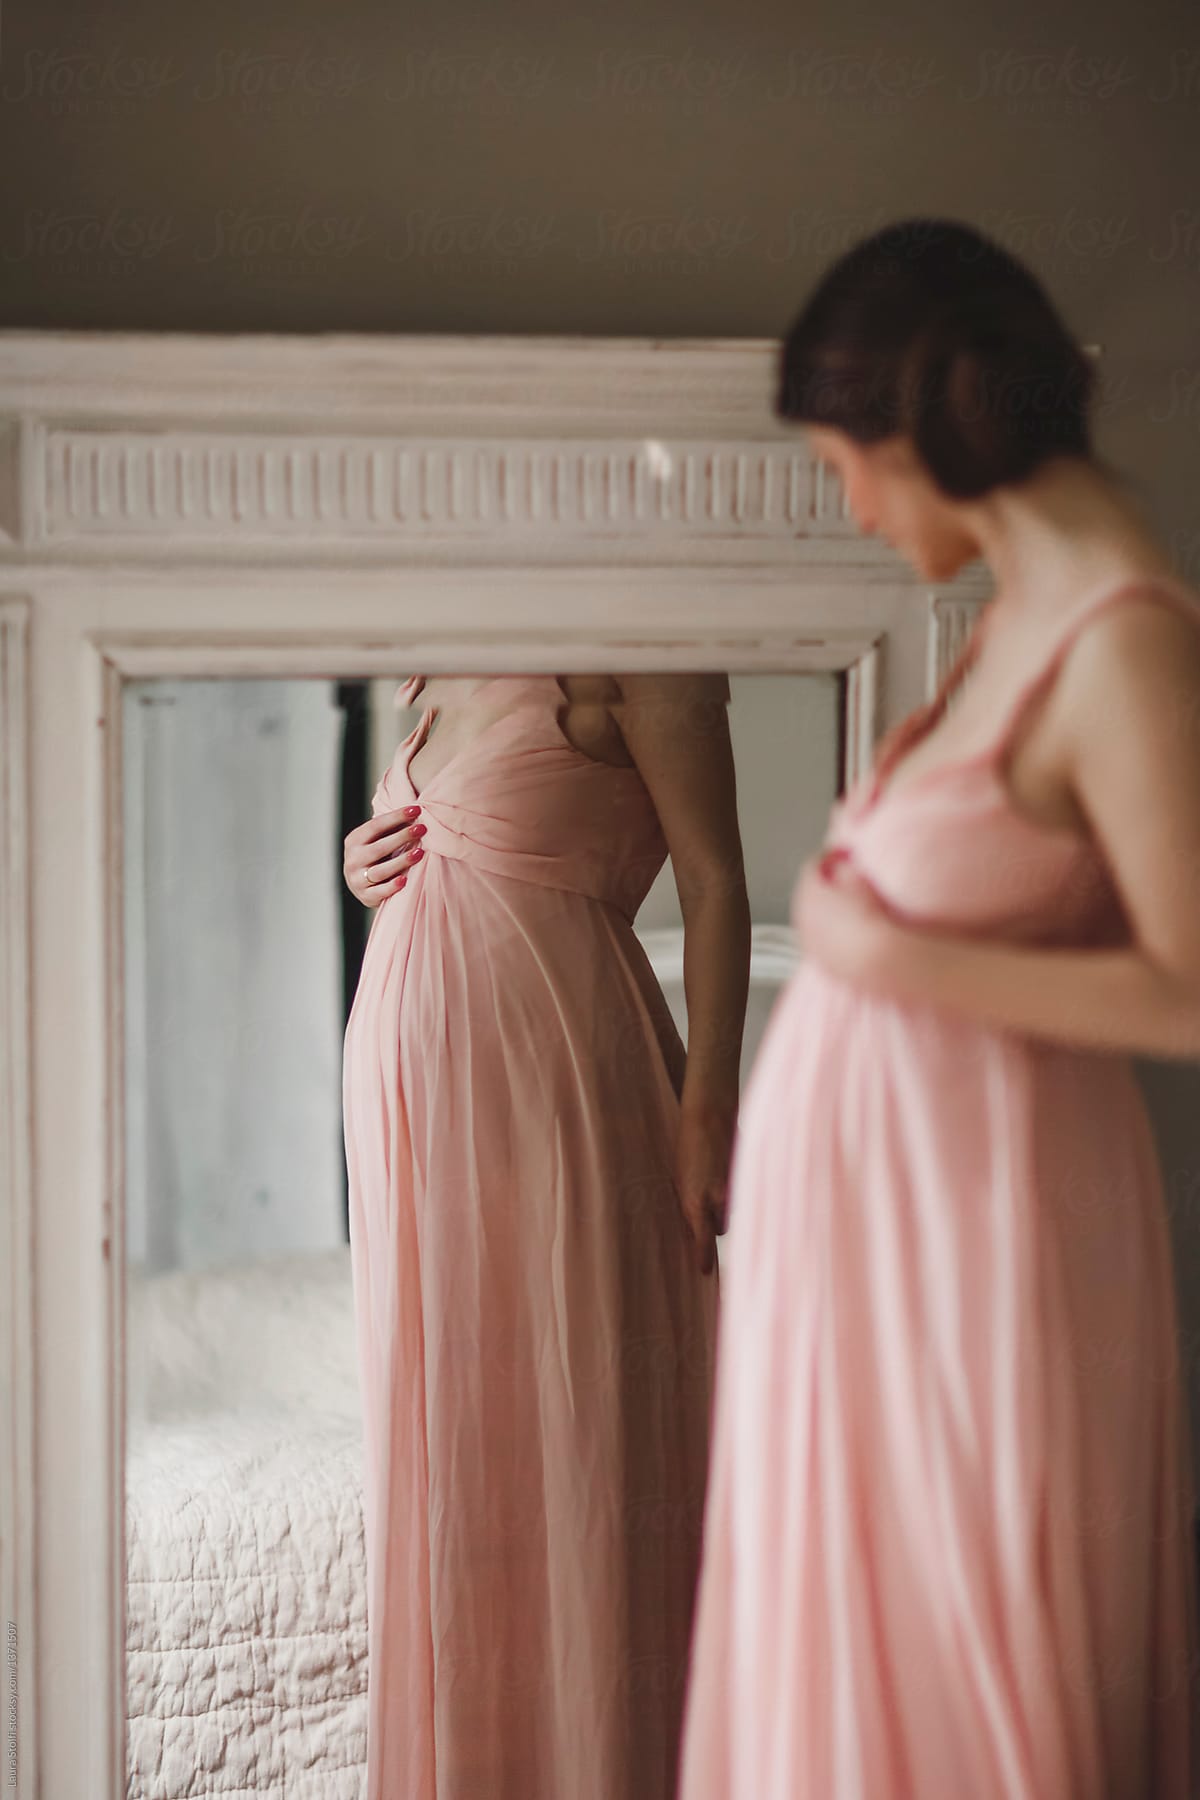 Woman touching and looking in mirror her pregnant belly while wearing a pink dress